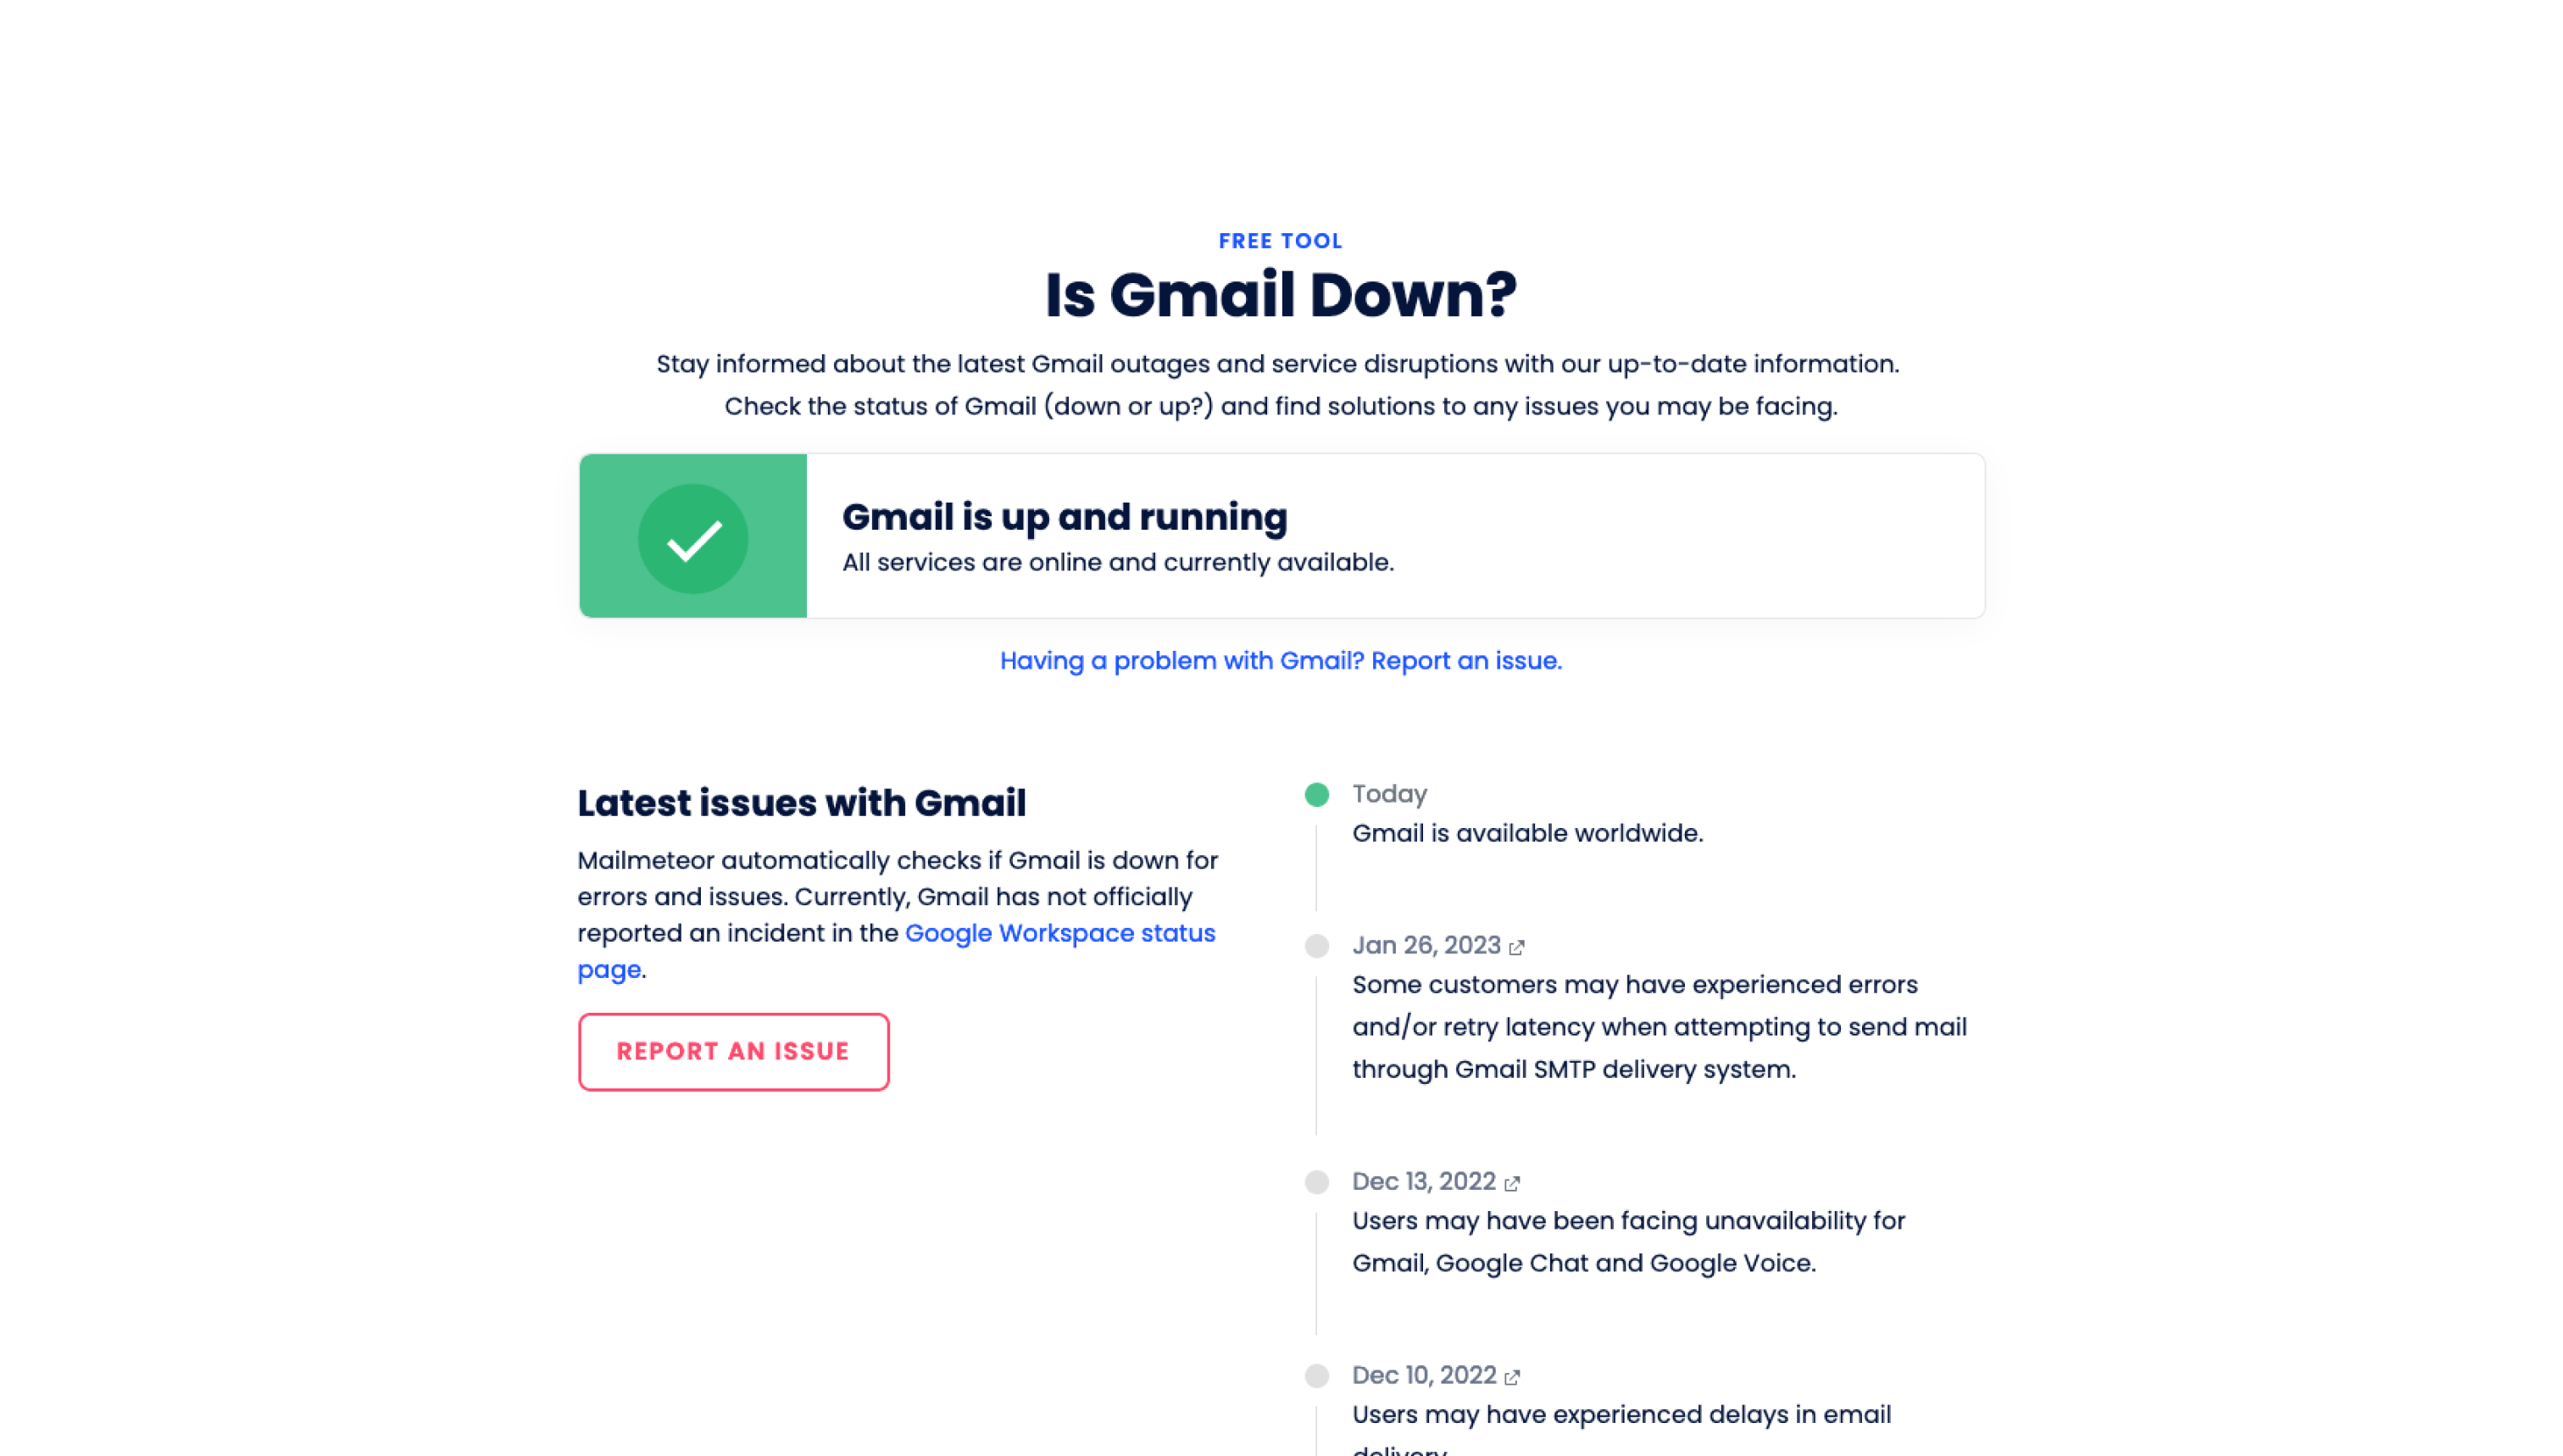 Is Gmail Down?